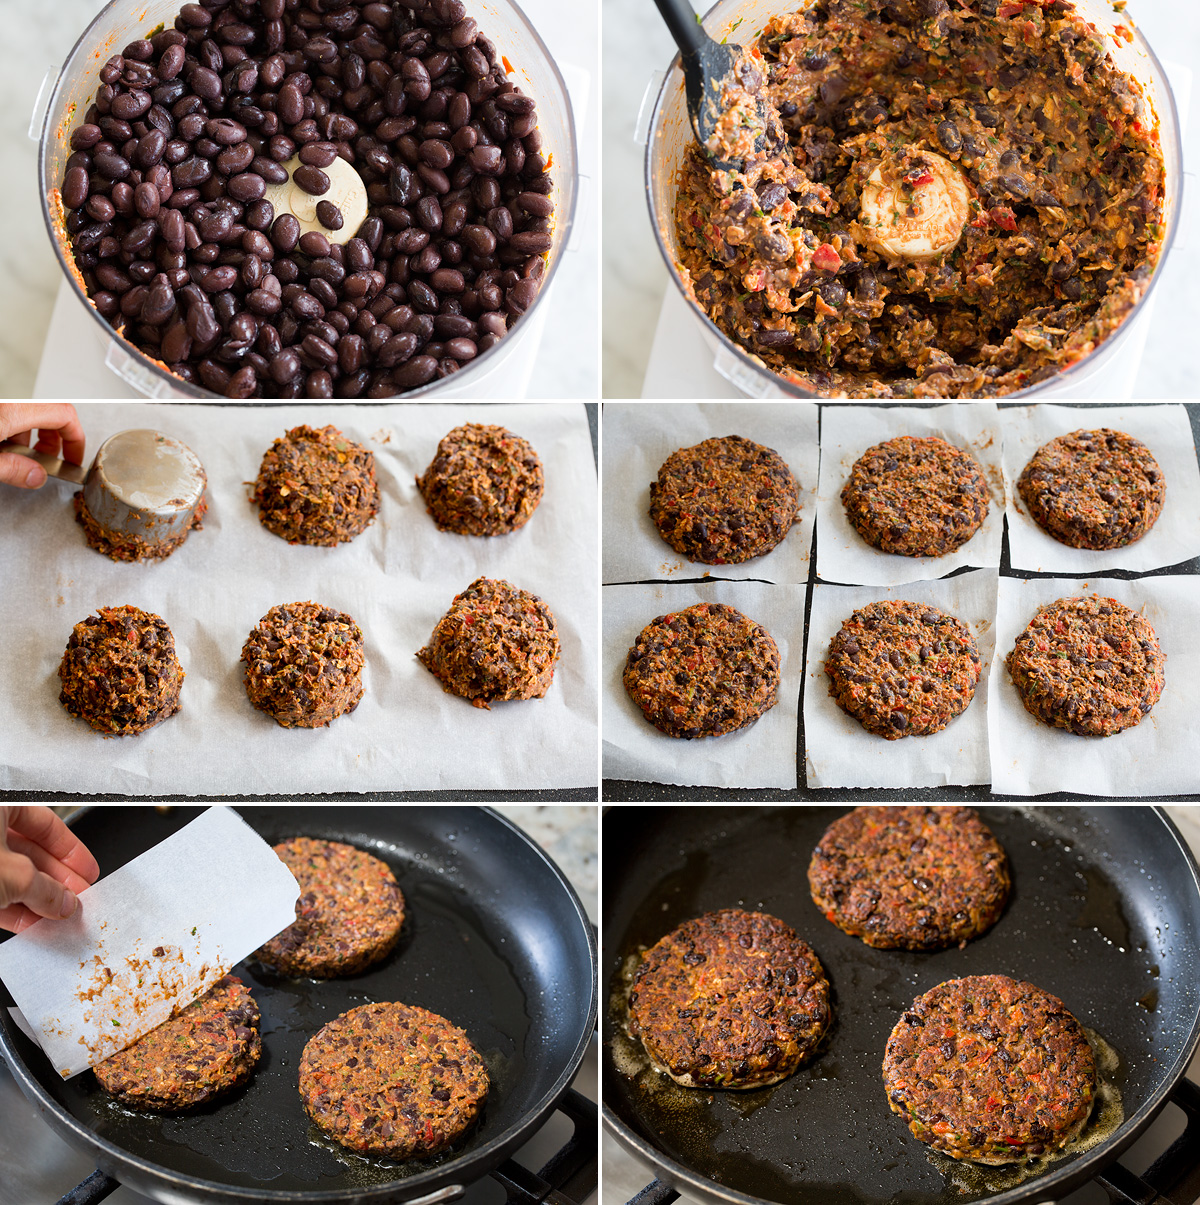 Six photos showing process of shaping black bean burgers and cooking in a skillet.